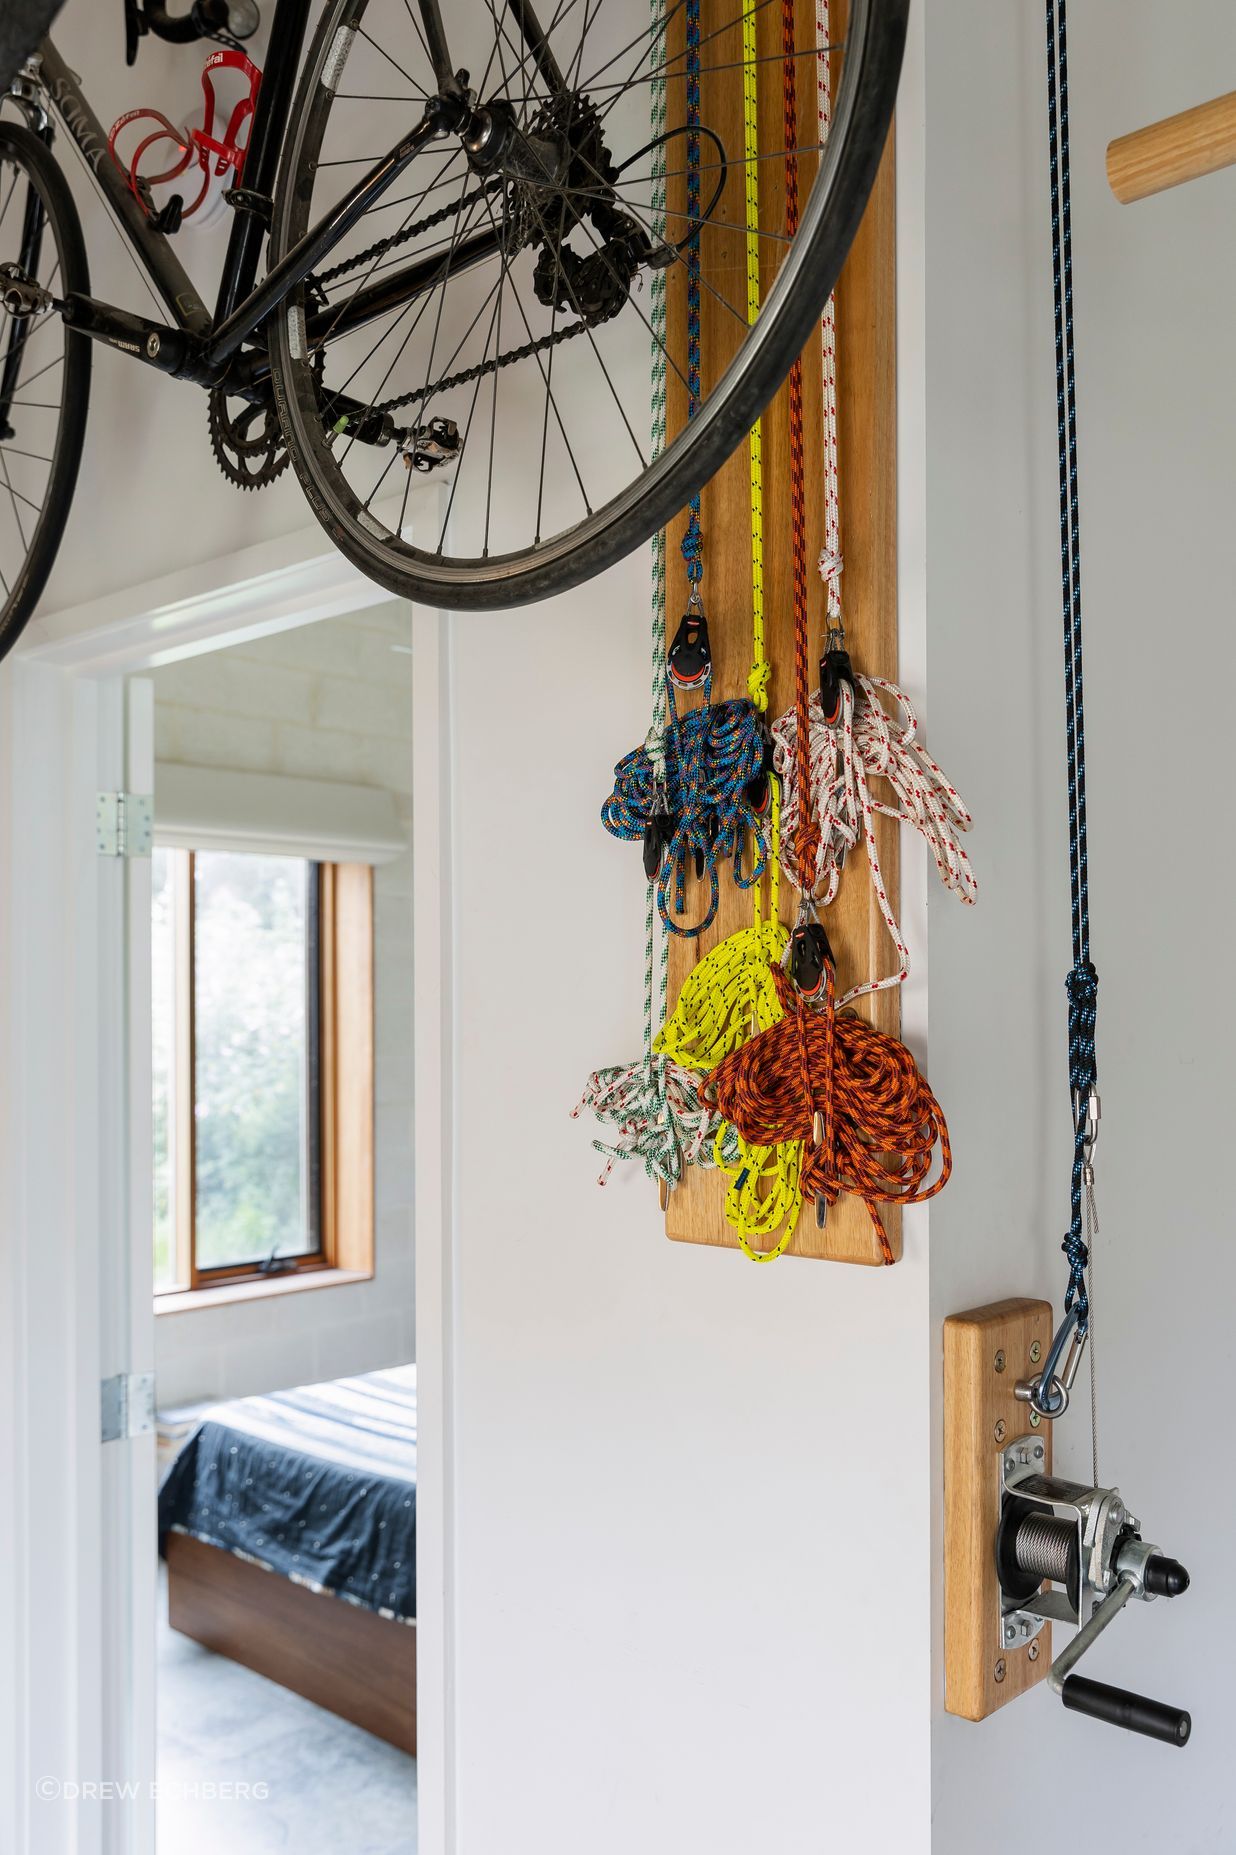 Ropes and winches used in the bike storage system